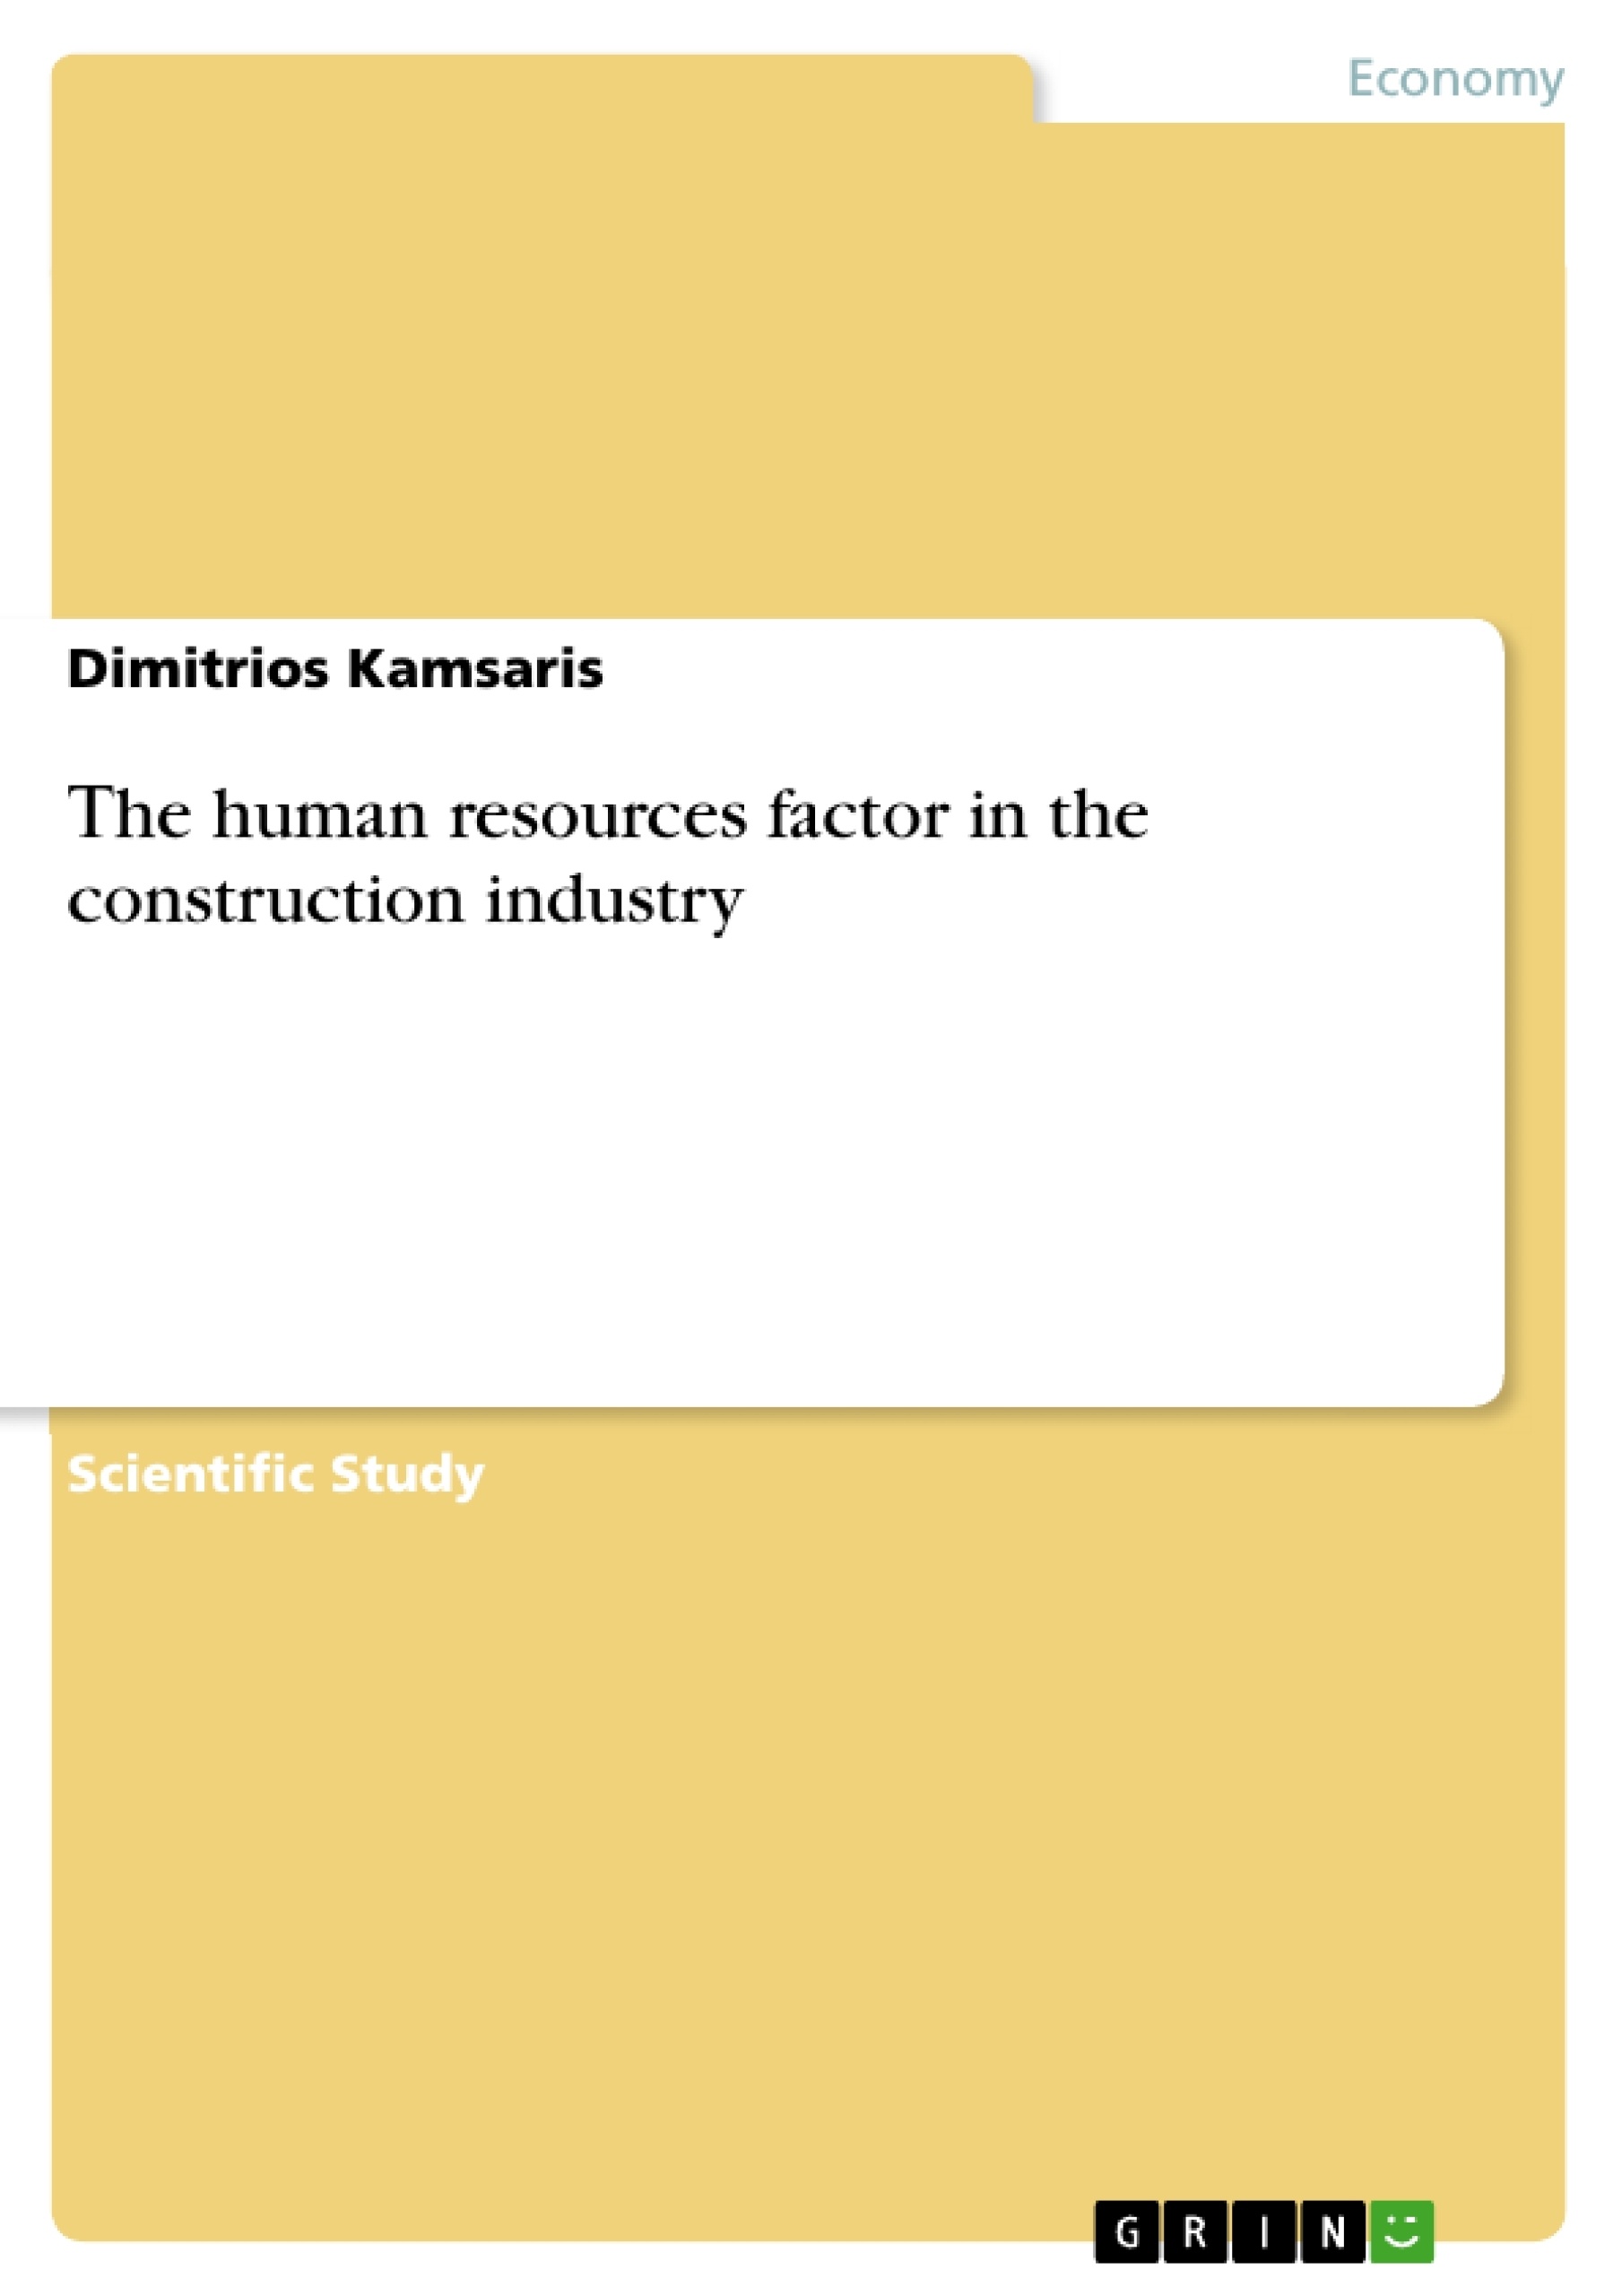 Title: Τhe human resources factor in the construction industry